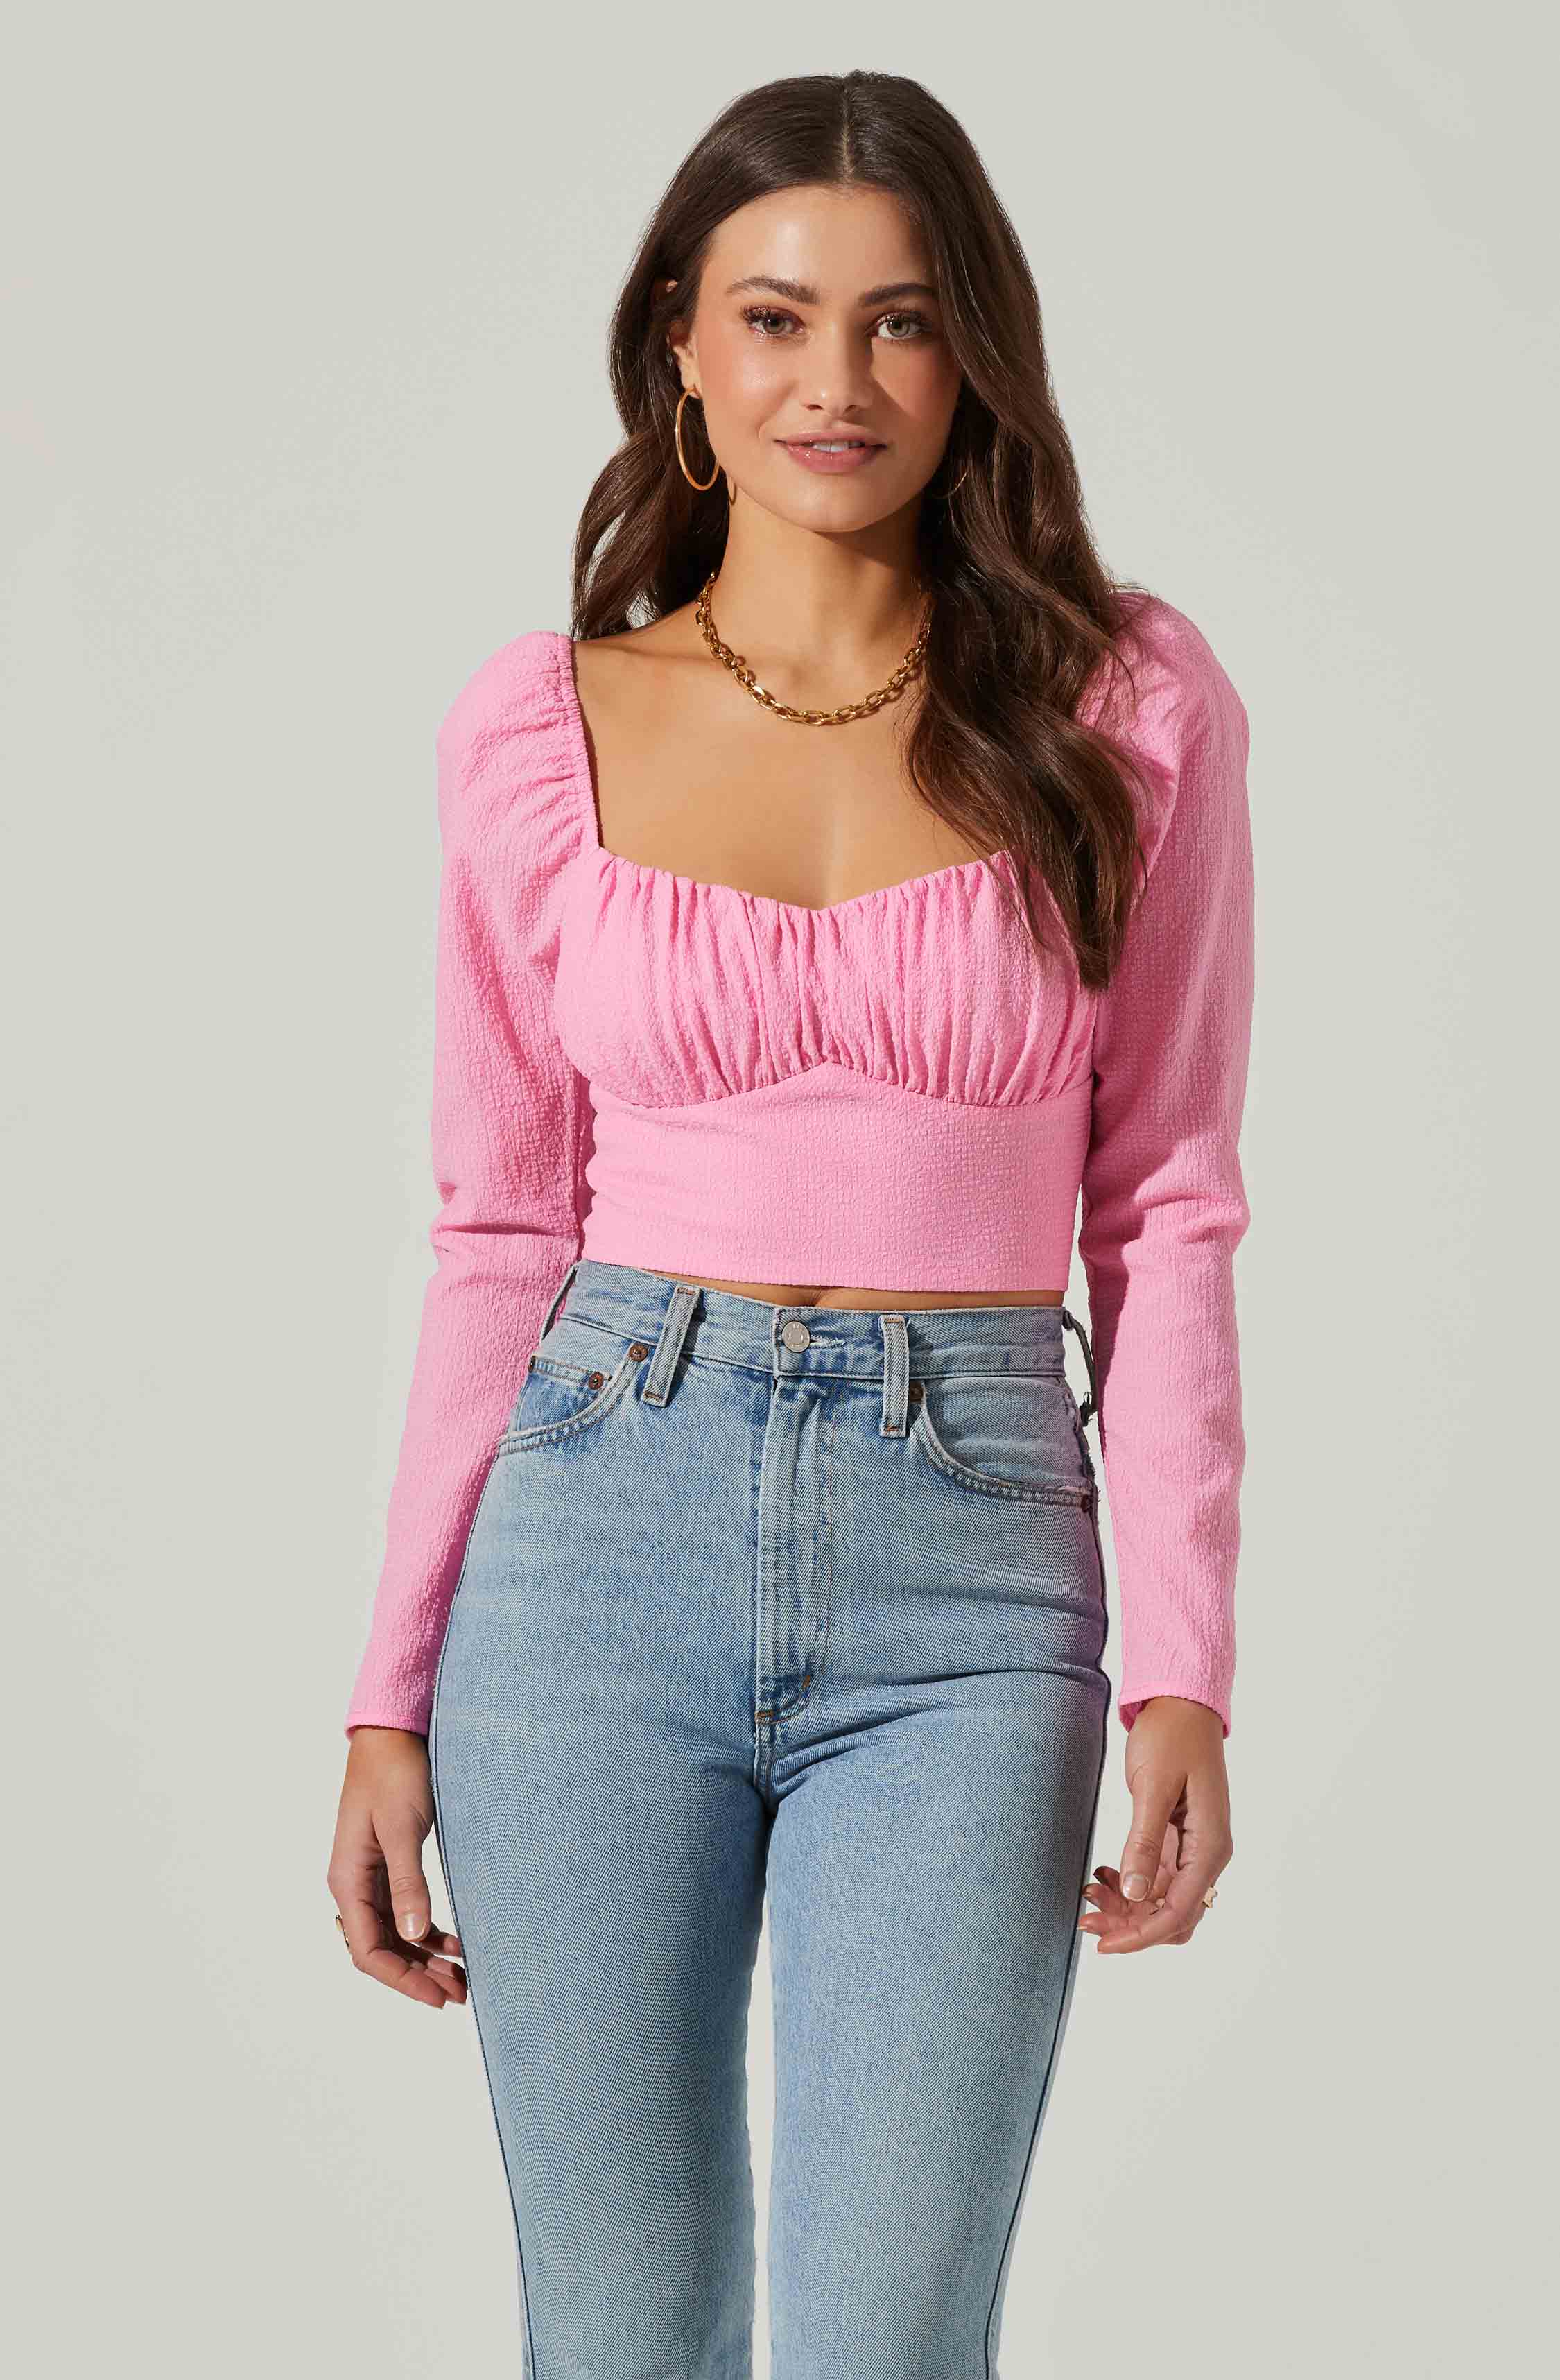 Women's Loose-fitting Crop Top - Long Puffy Sleeves and Straight-cut  Neckline / Pink